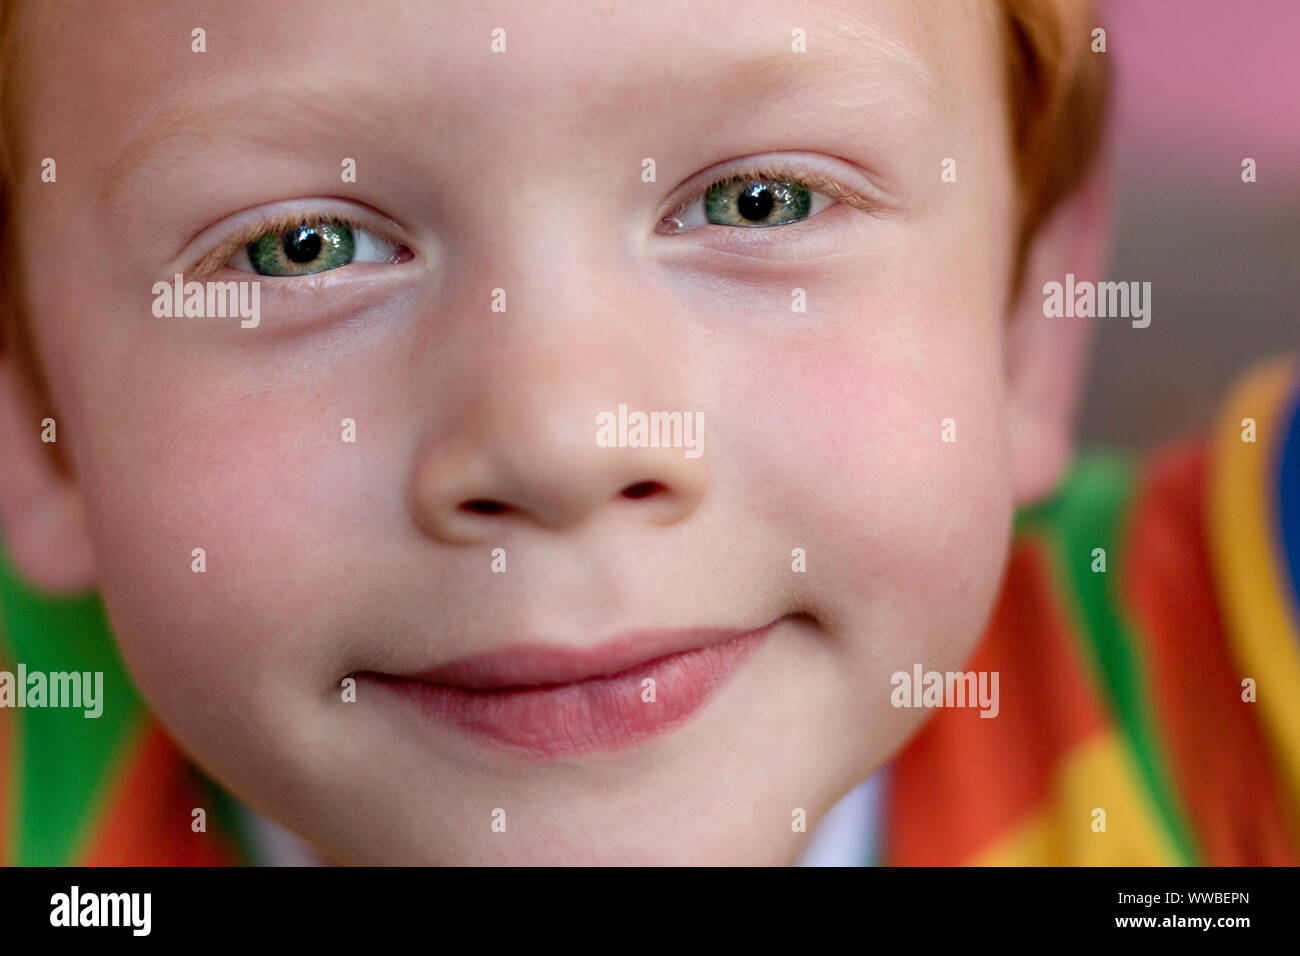 Closeup of beautiful boy eyes. Portrait kid with green eyes looking directly at the camera. Funny little child with curly ginger hair. Vision Stock Photo